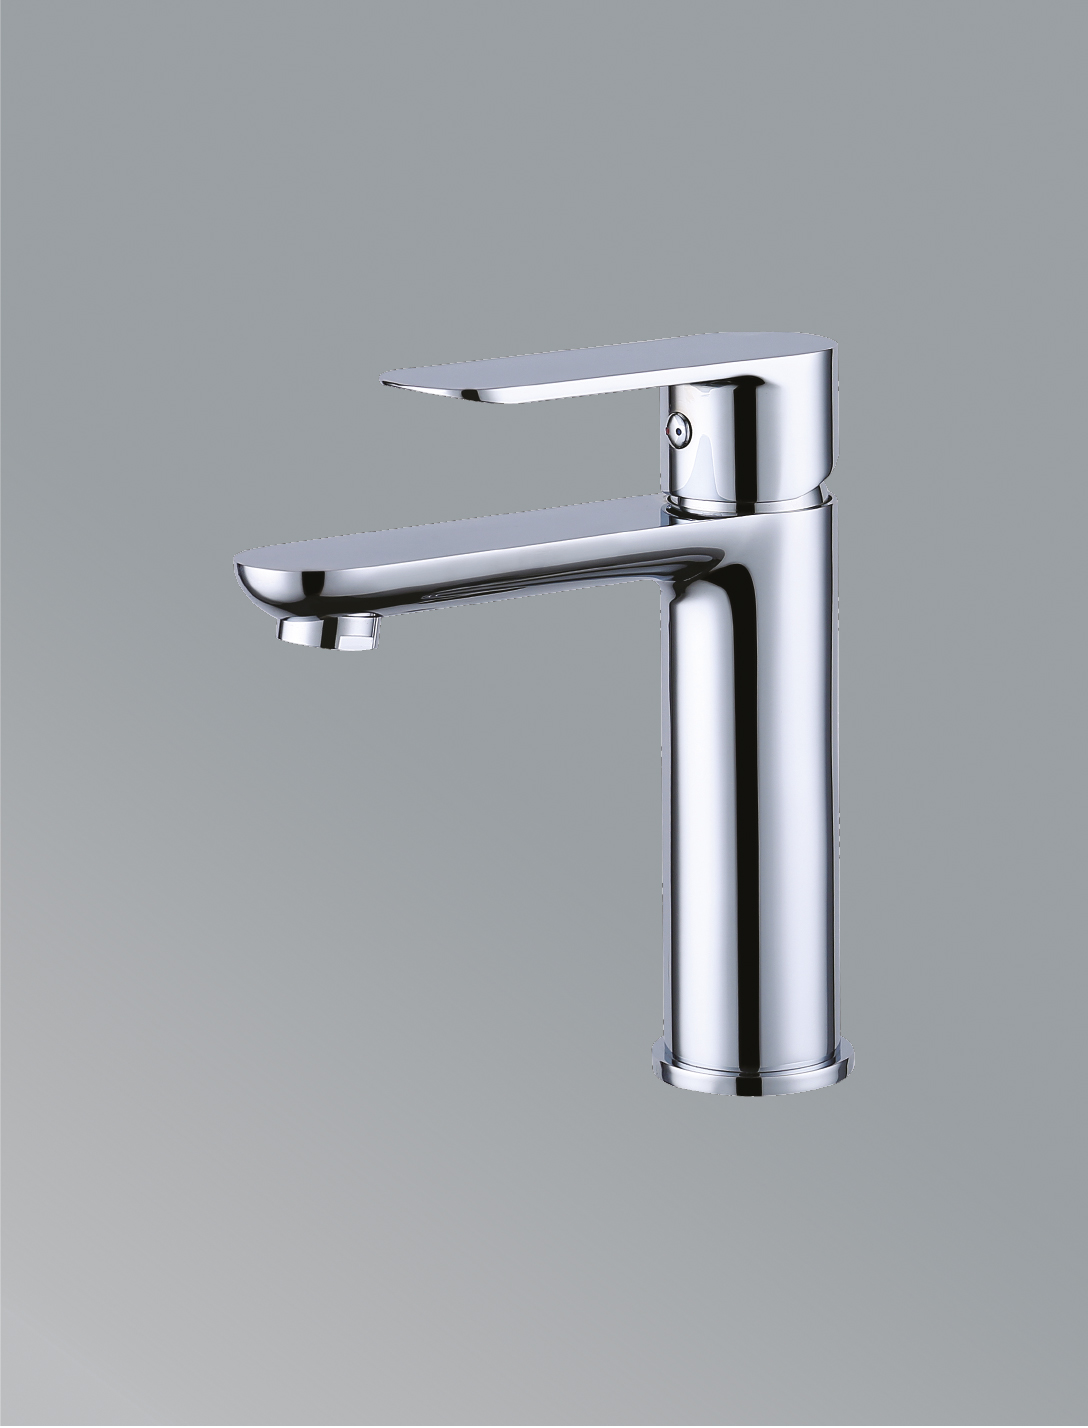   Single Control Basin Faucet In Polished Chrome